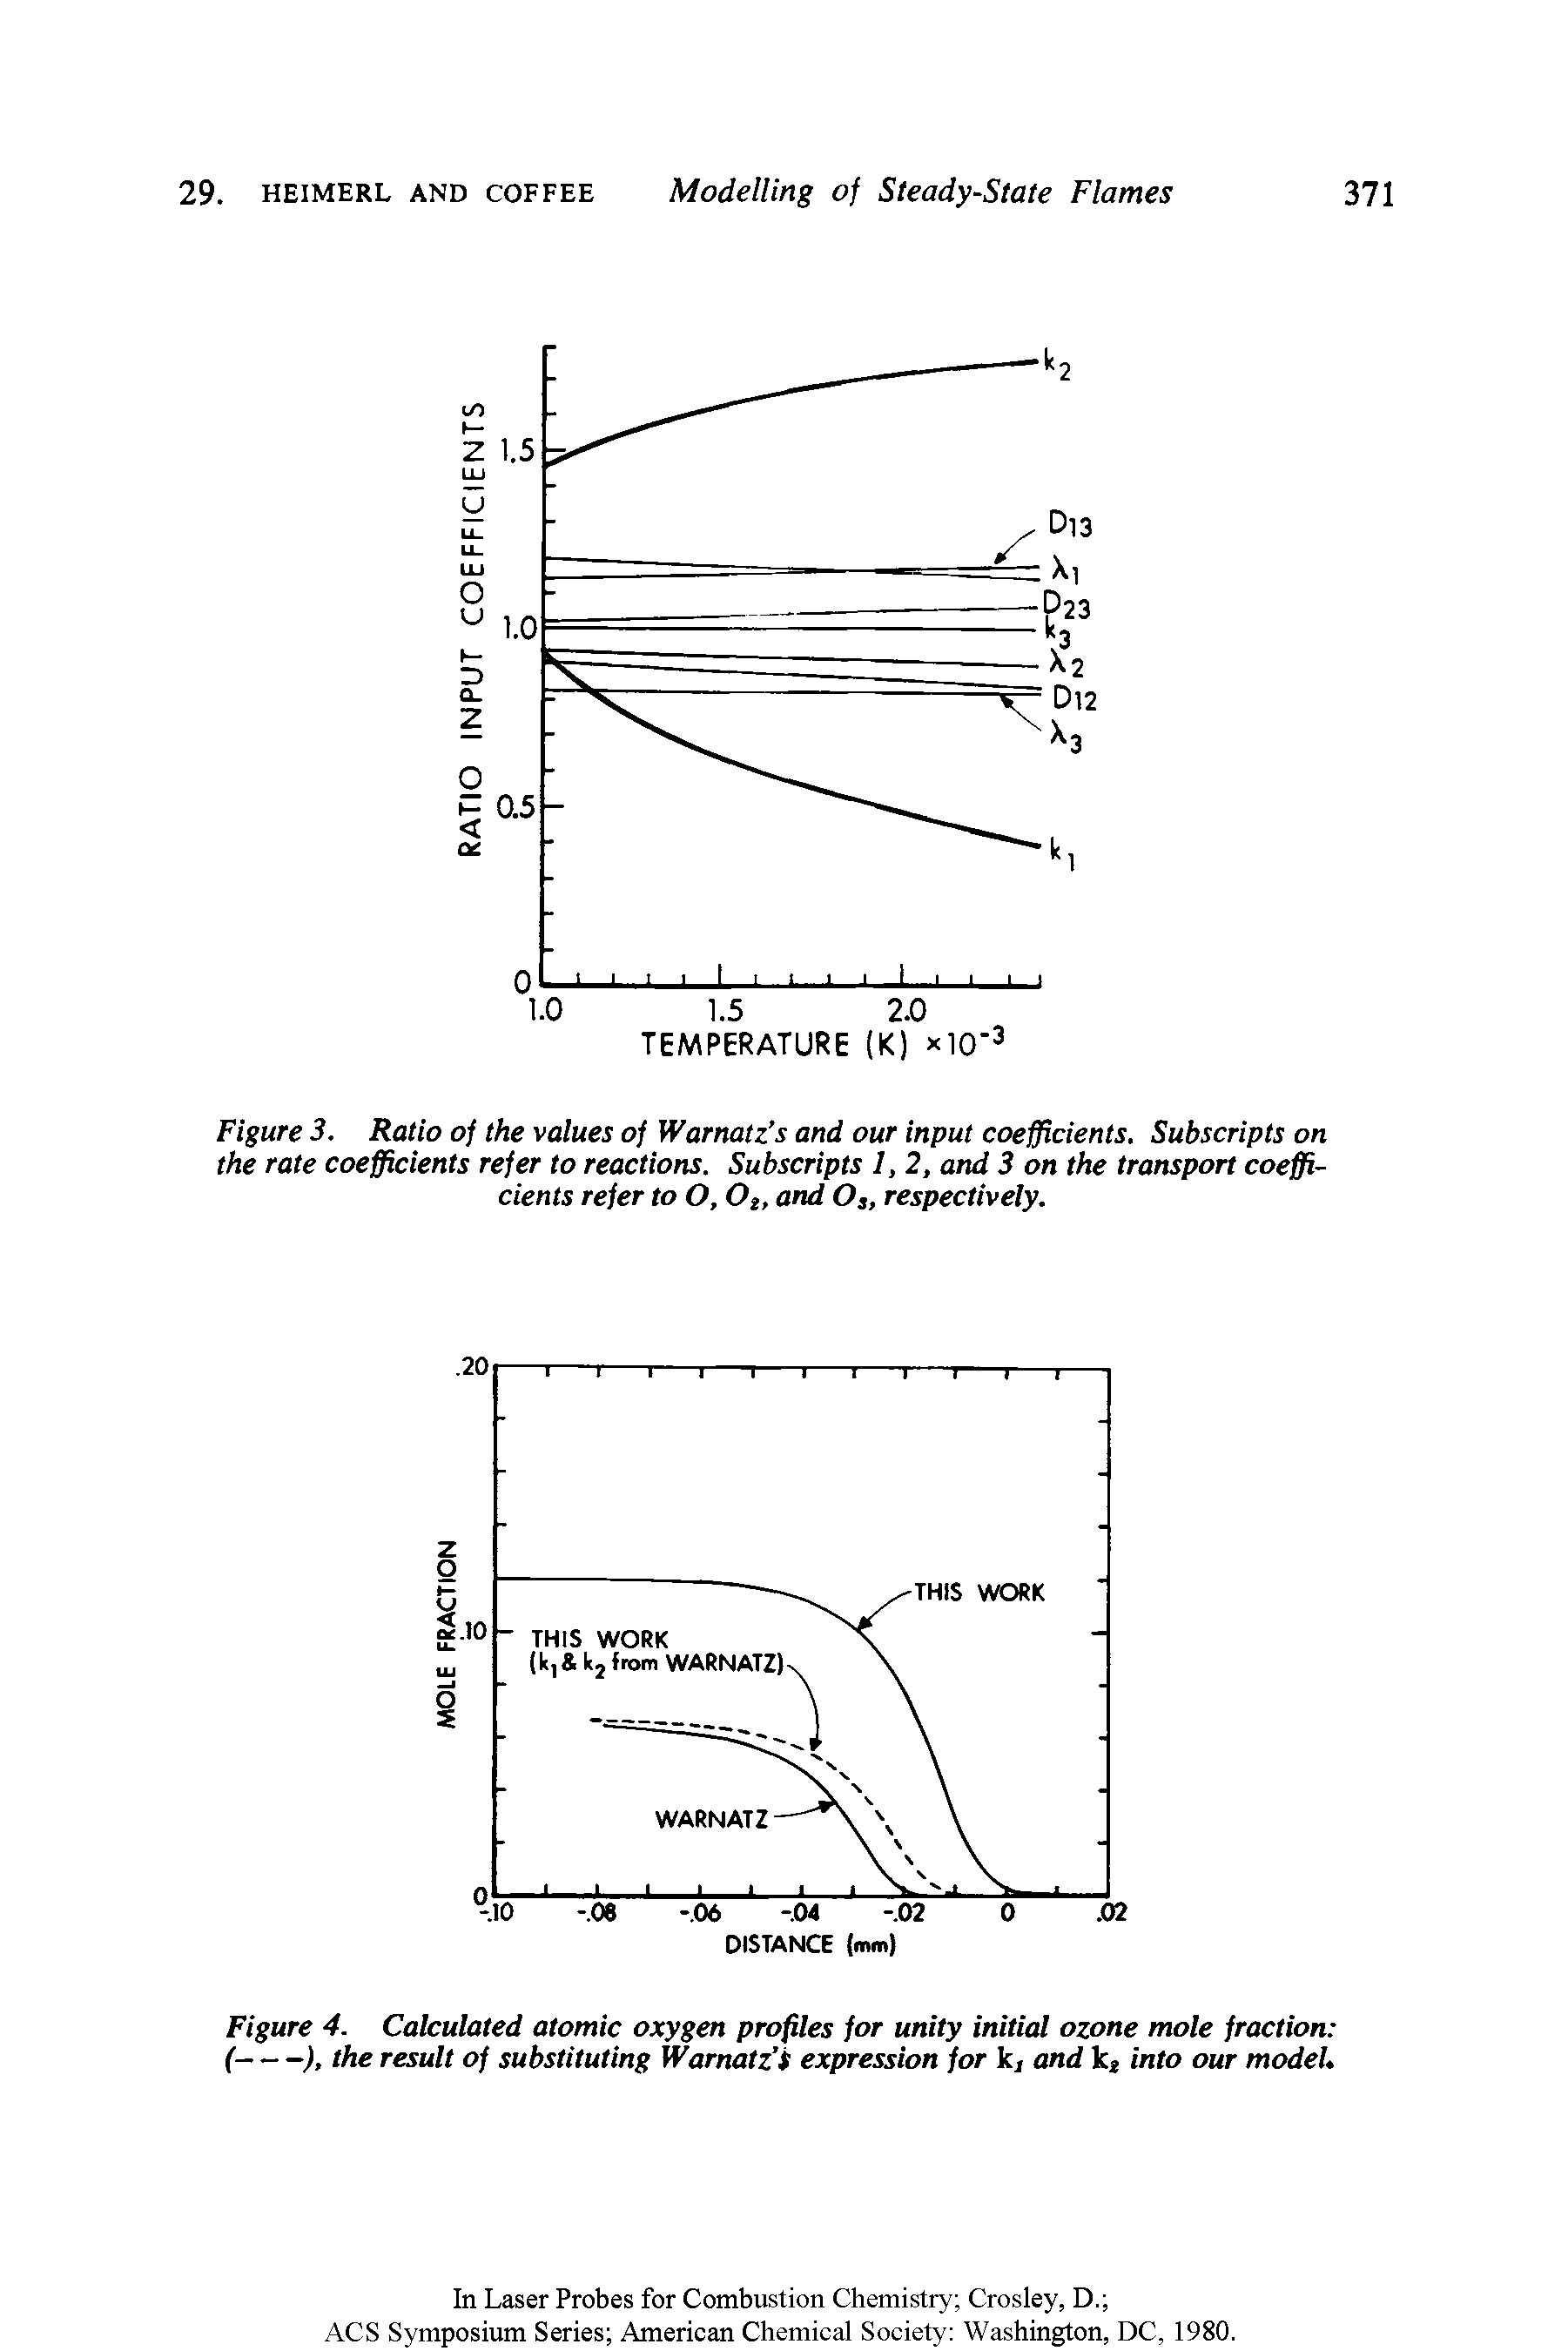 Figure 4. Calculated atomic oxygen profiles for unity initial ozone mole fraction (-----), the result of substituting Warnatz s expression for k, and k into our model.